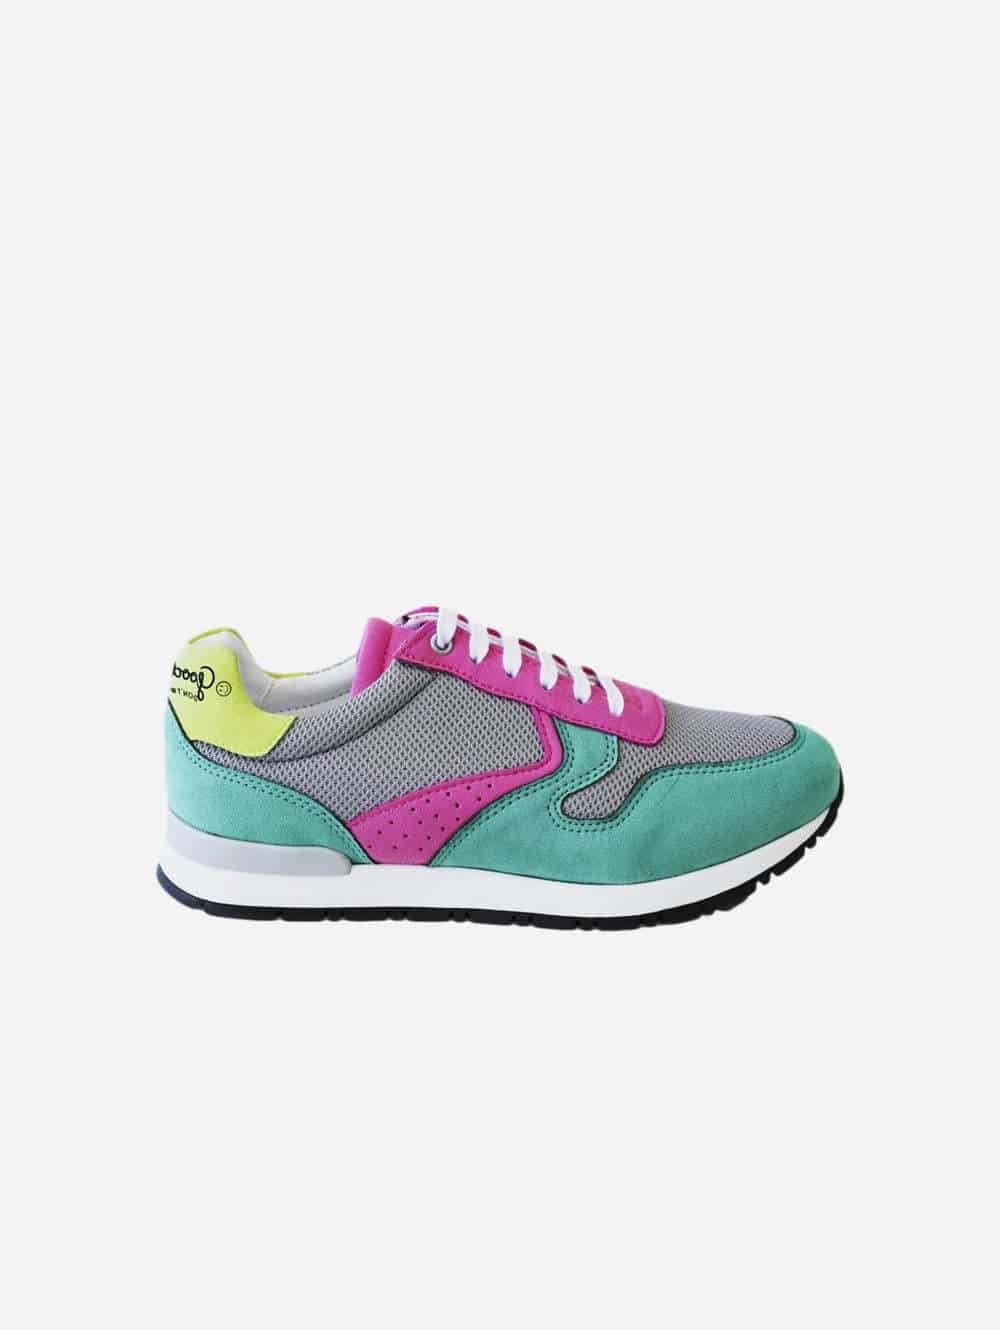 Multicolour vegan suede trainer in neon yellow, teal, grey and fuschia